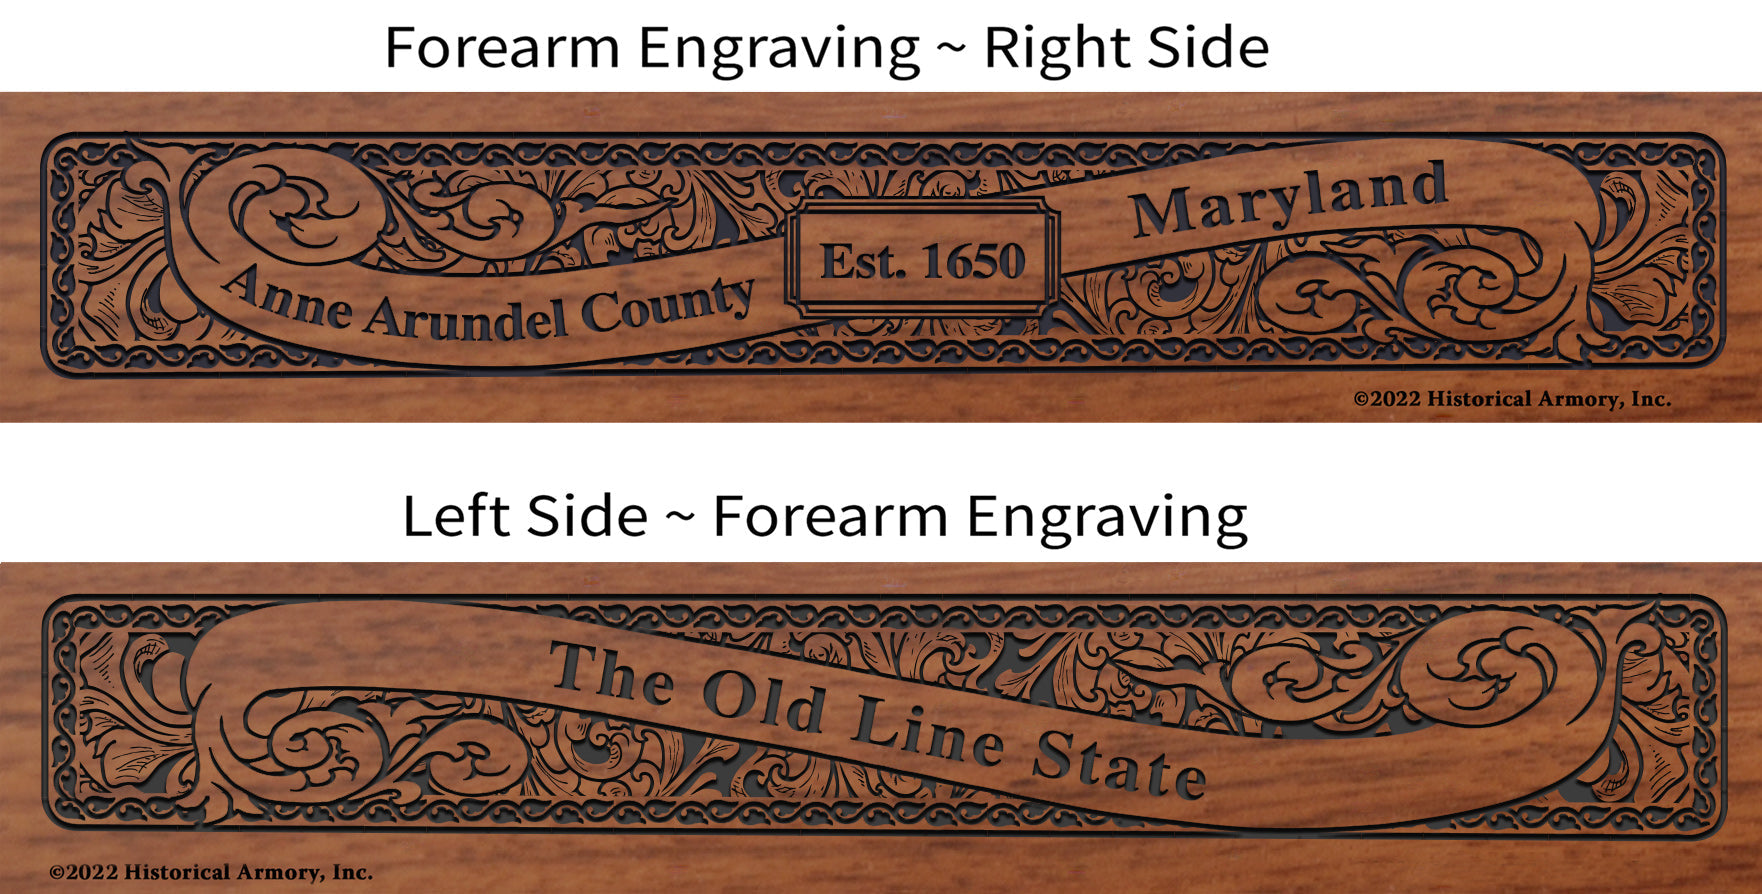 Anne Arundel County Maryland Engraved Rifle Forearm